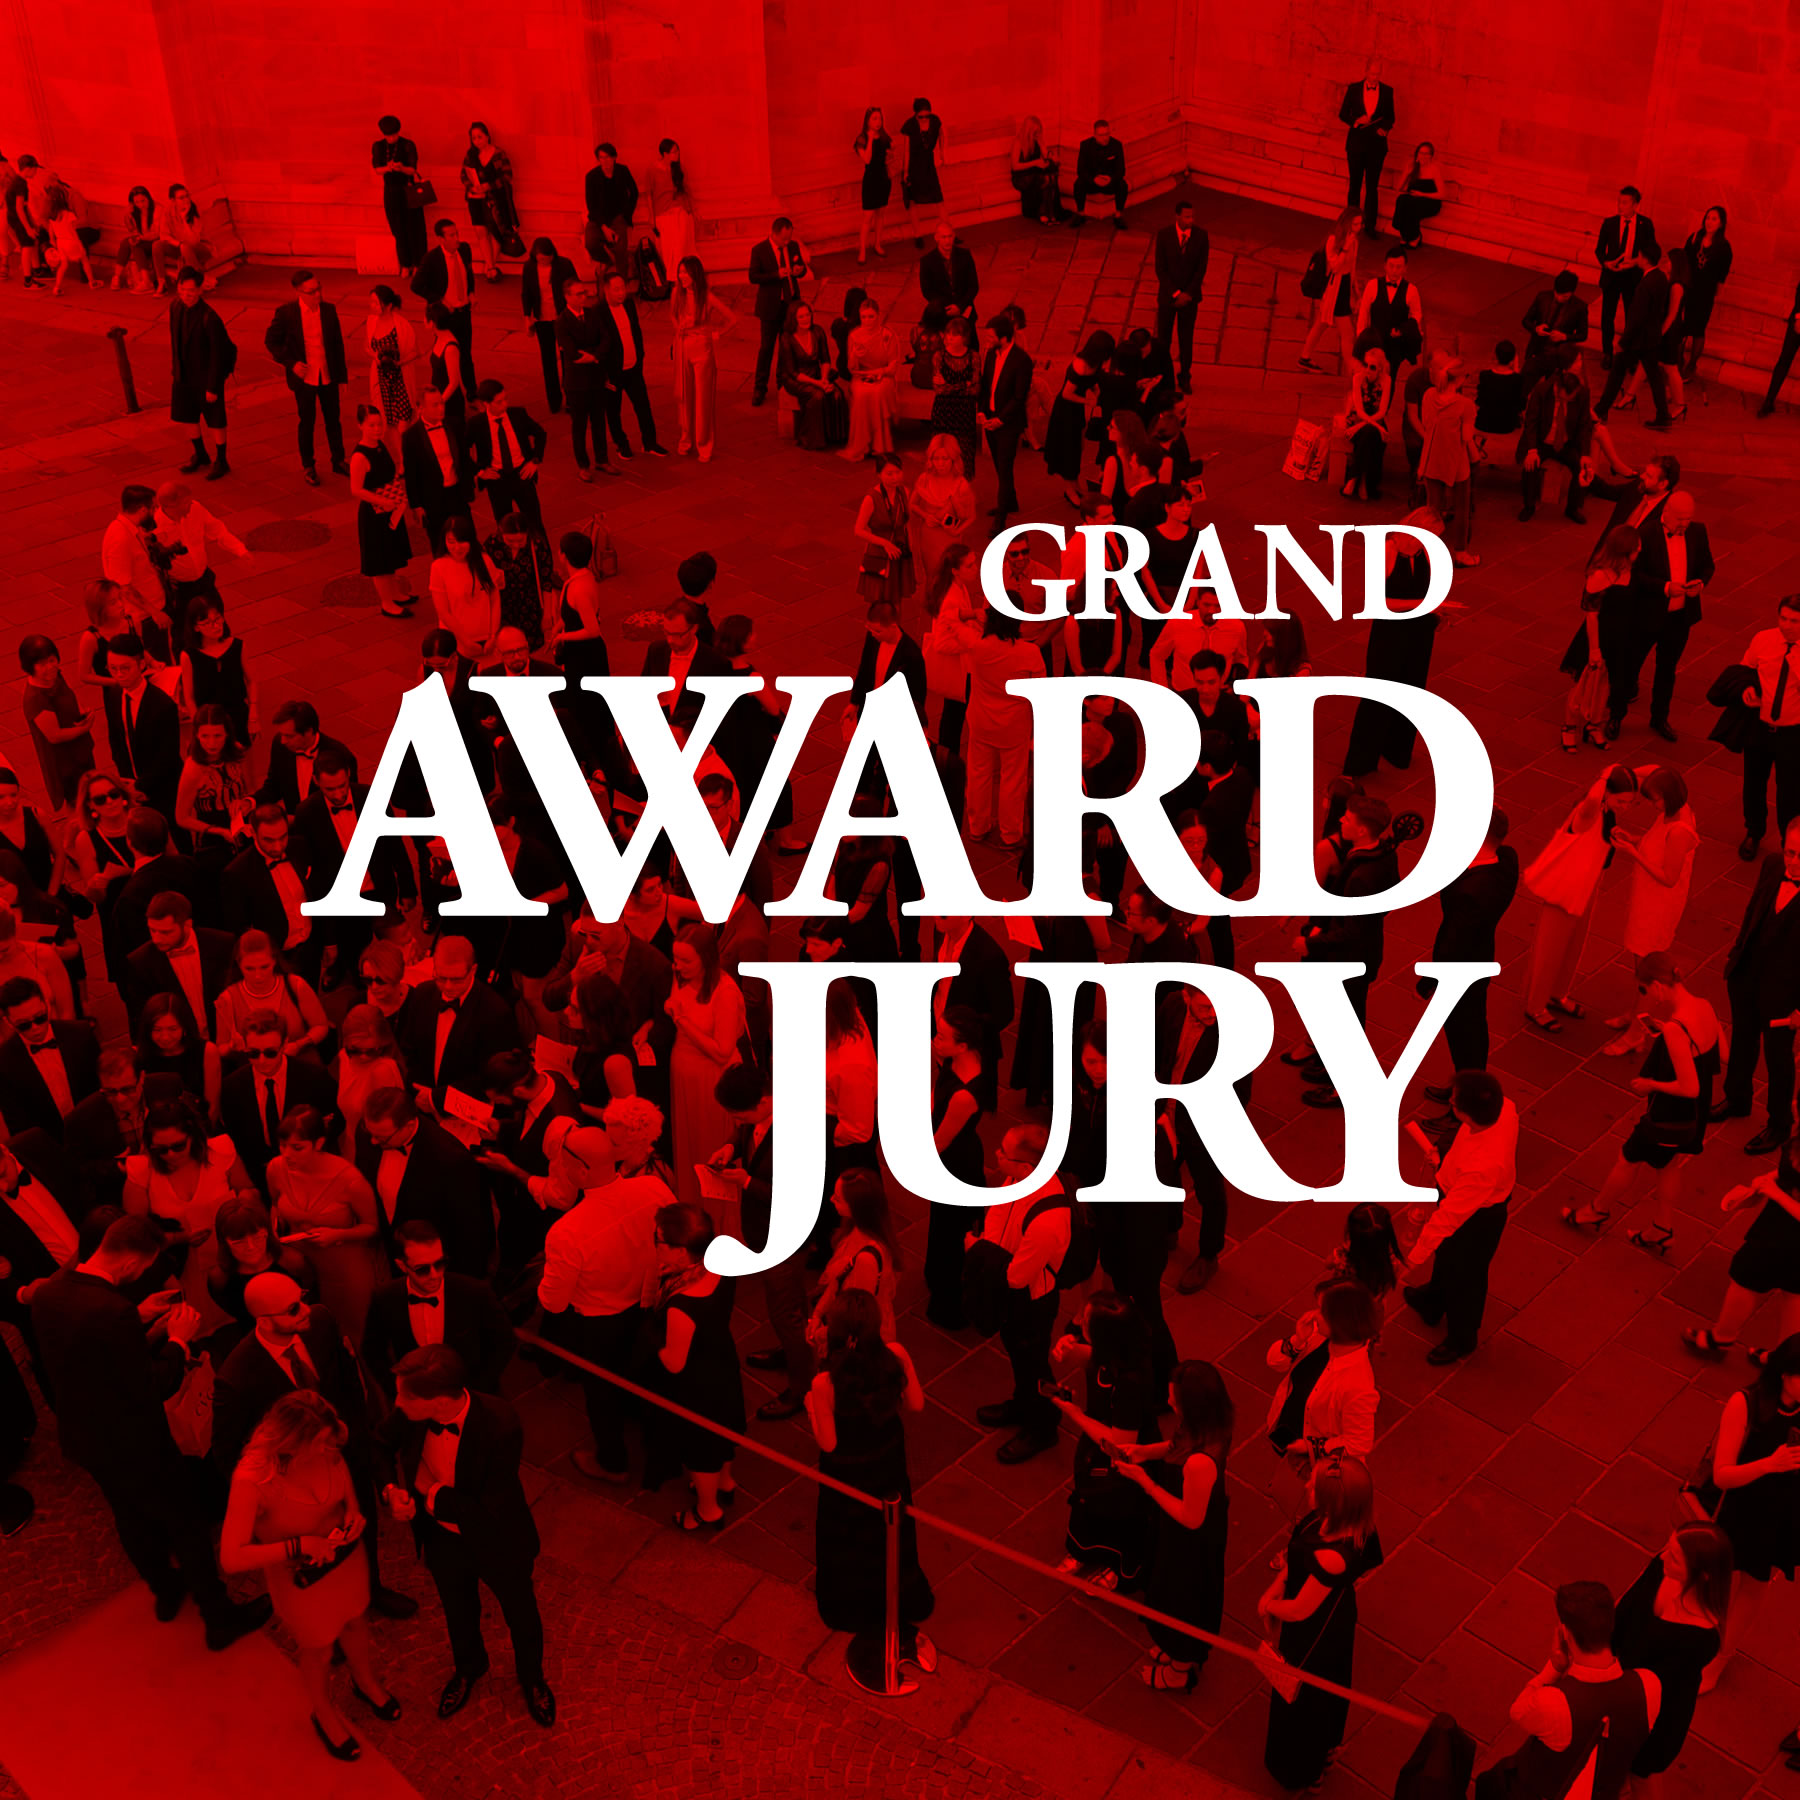 Grand Award Jury logo on red background photograph of gala guests